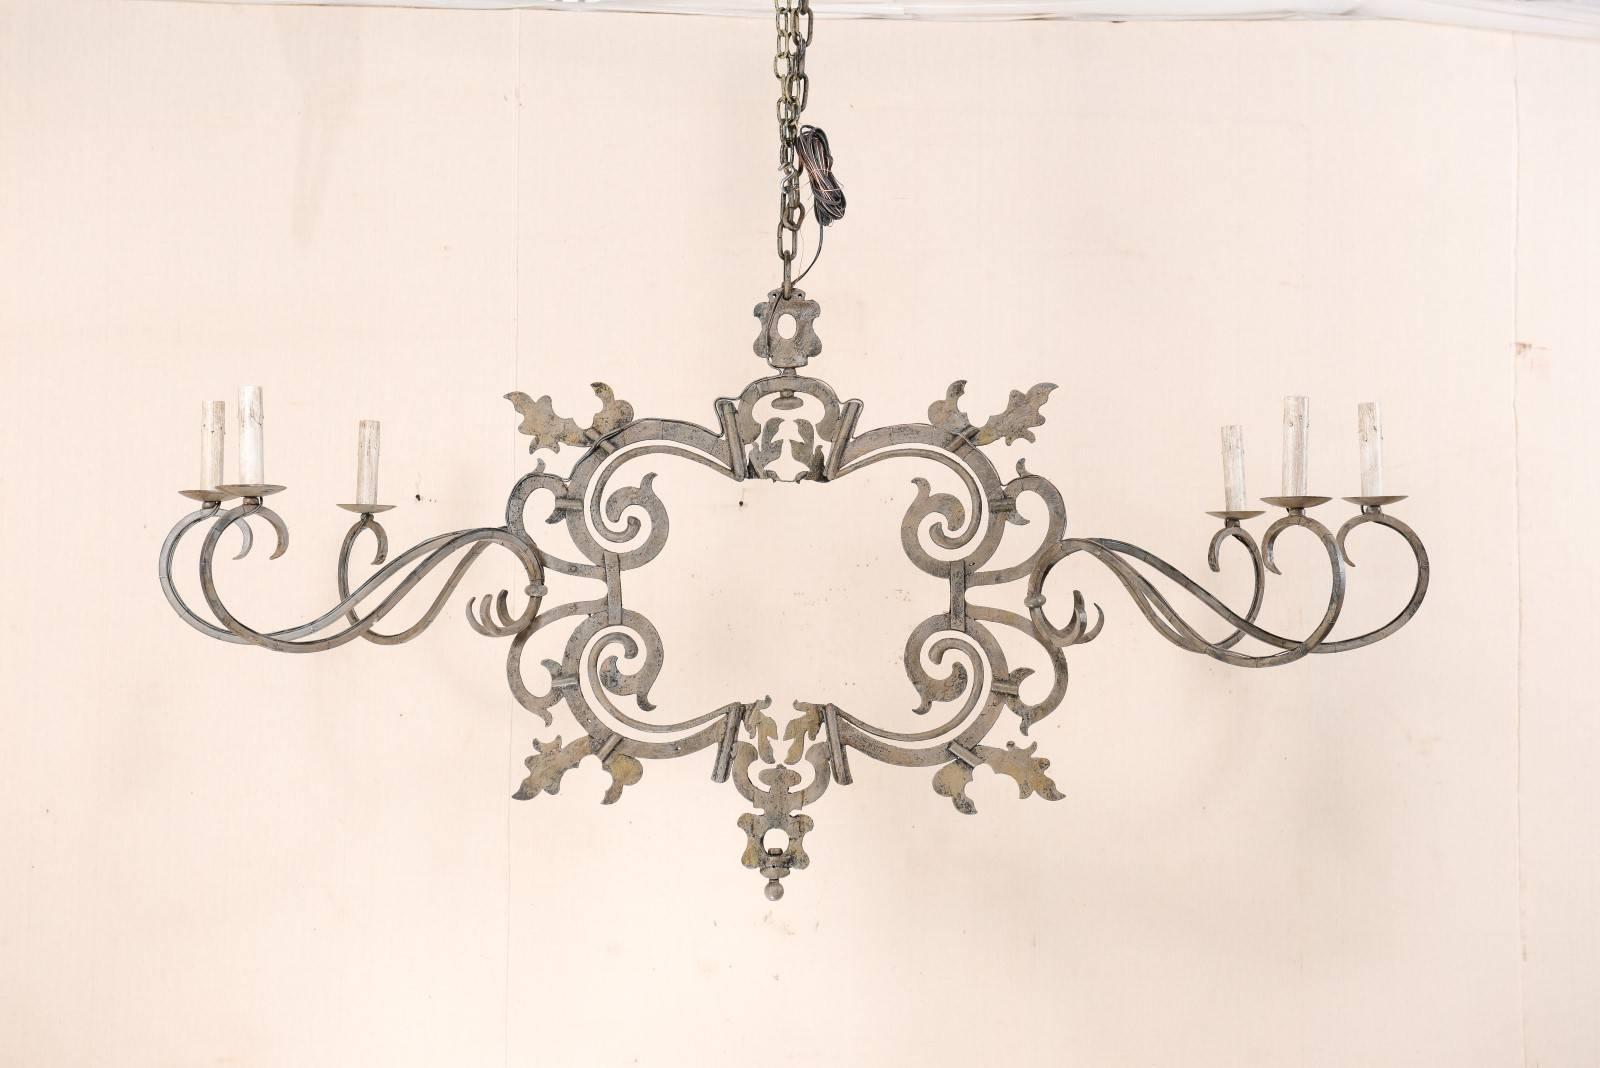 This very special and large-sized chandelier has been custom fashioned from 18th century ironwork. This Italian chandelier with it's impressive spread of over 6 feet wide, features an 18th century decorative iron work centre, likely once the ornate